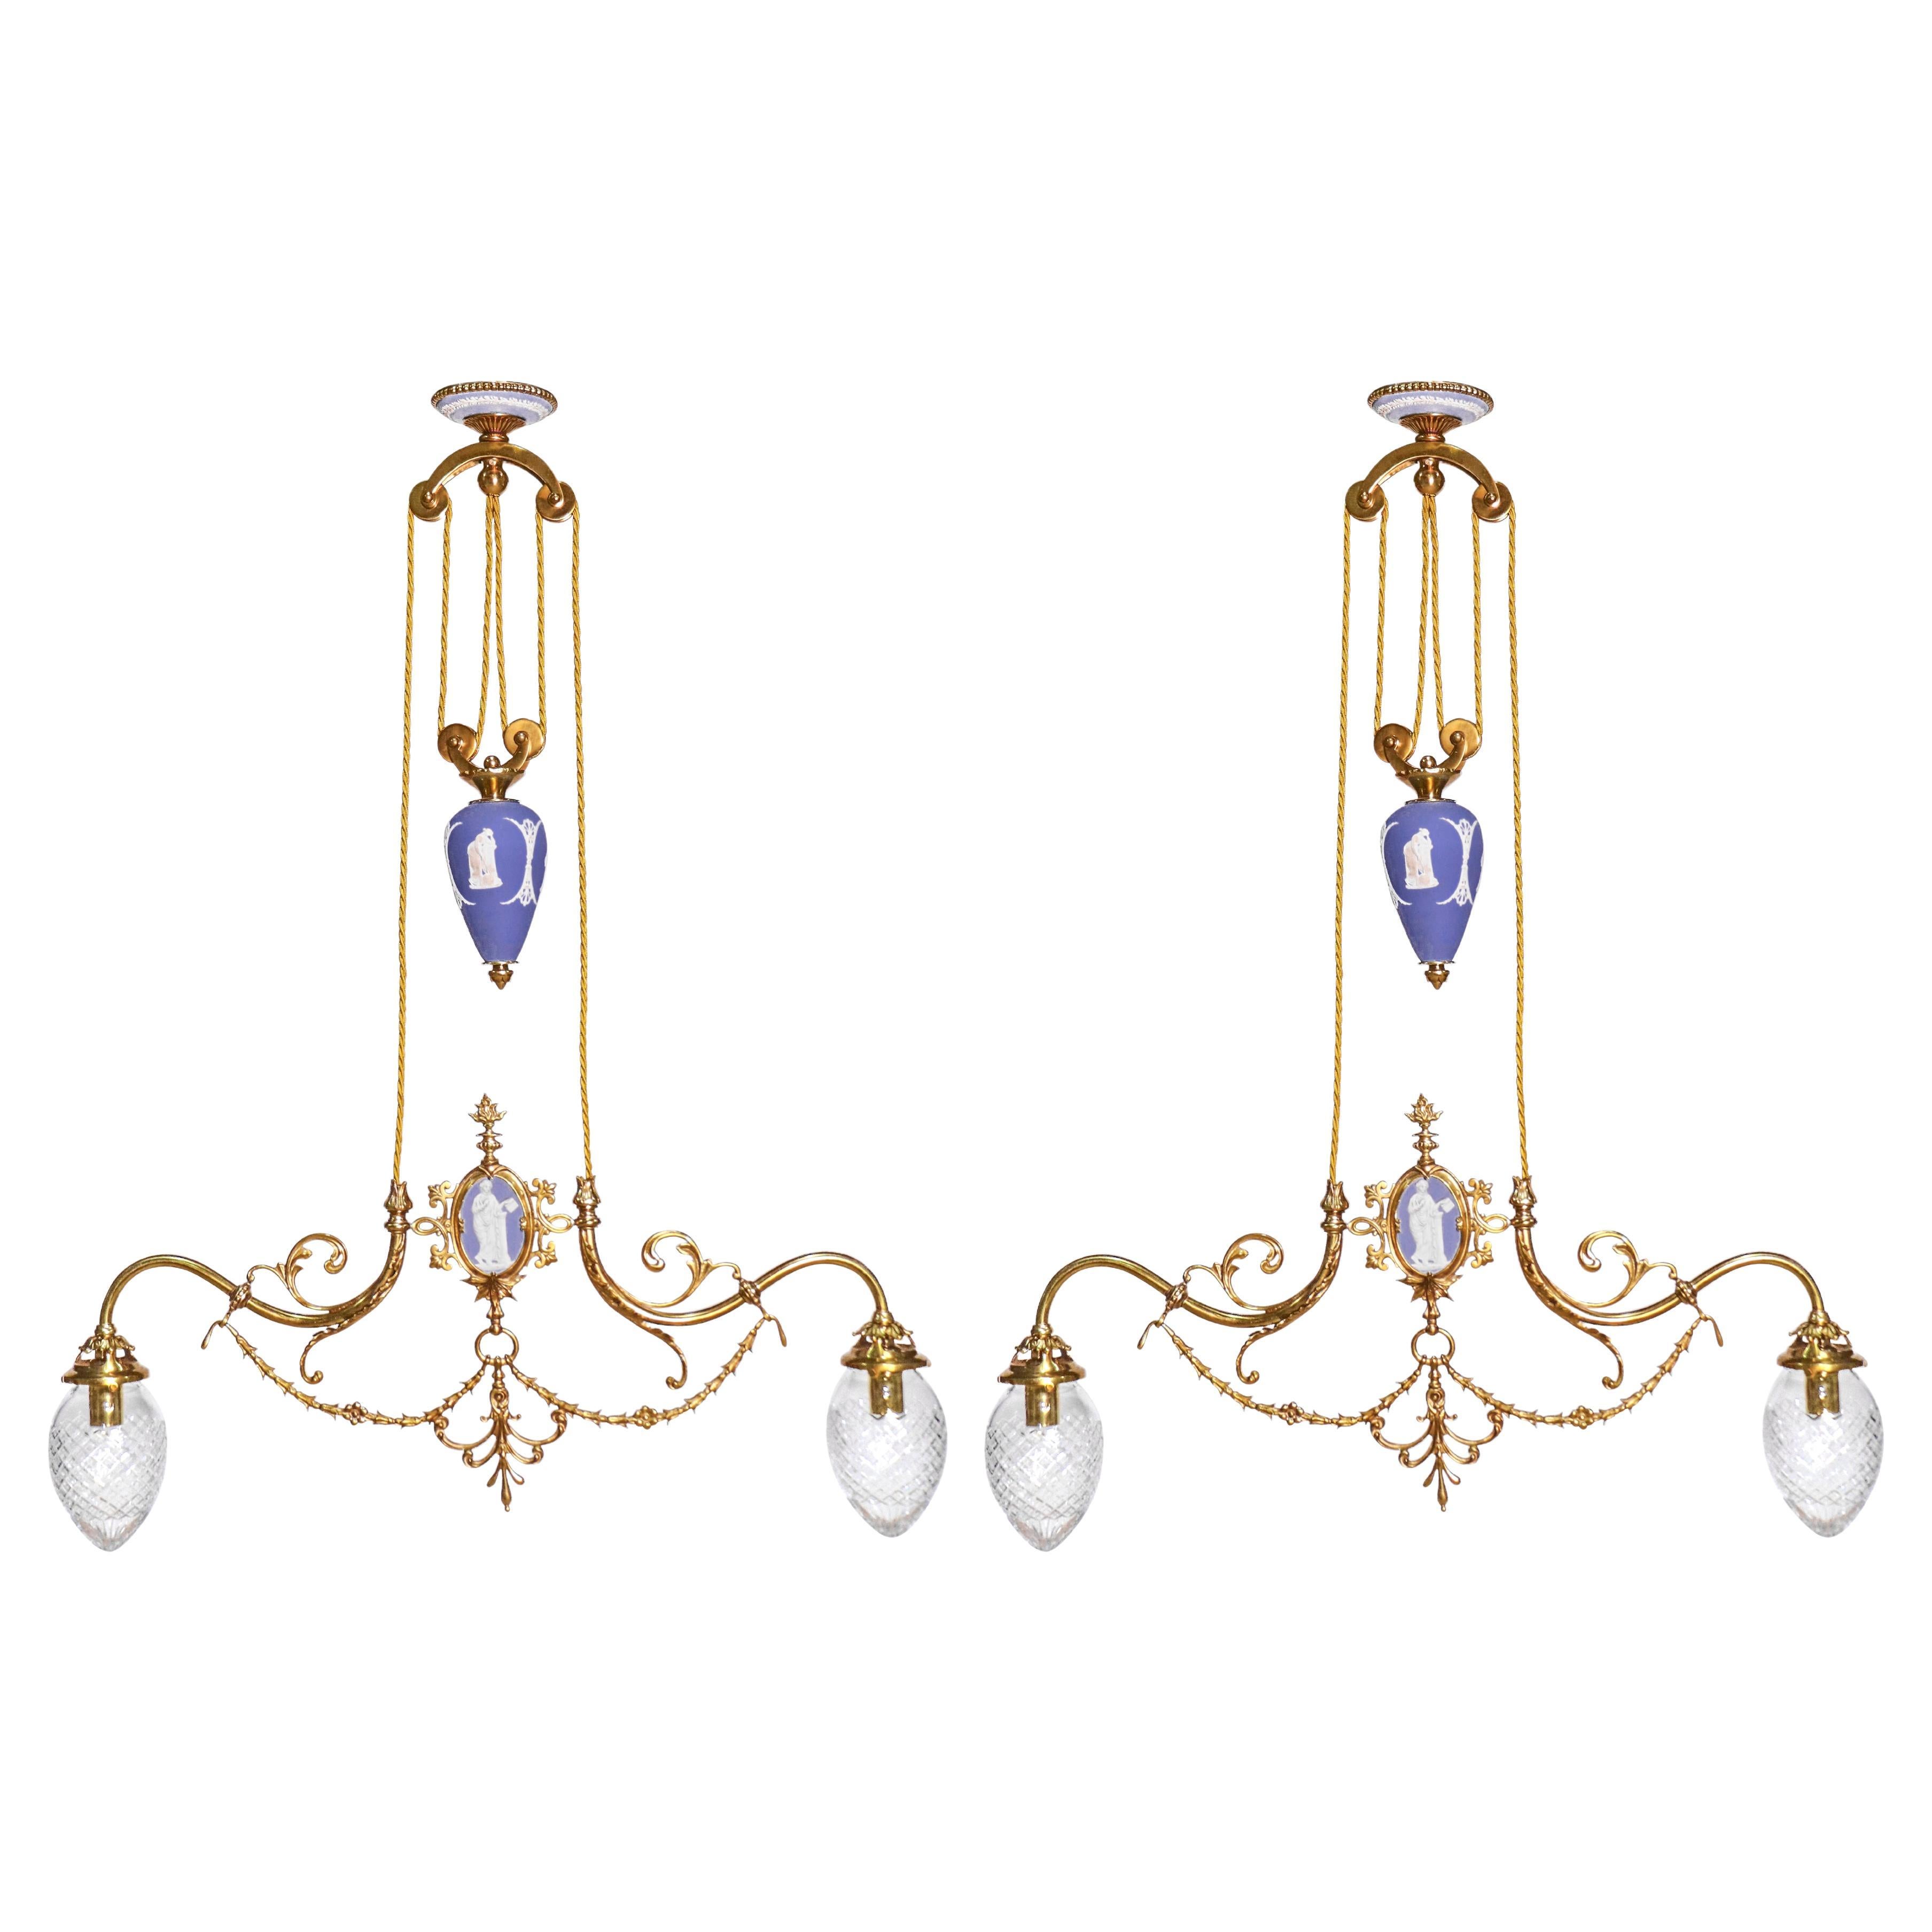 Pair of English Wedgwood Two-Arm Chandeliers For Sale